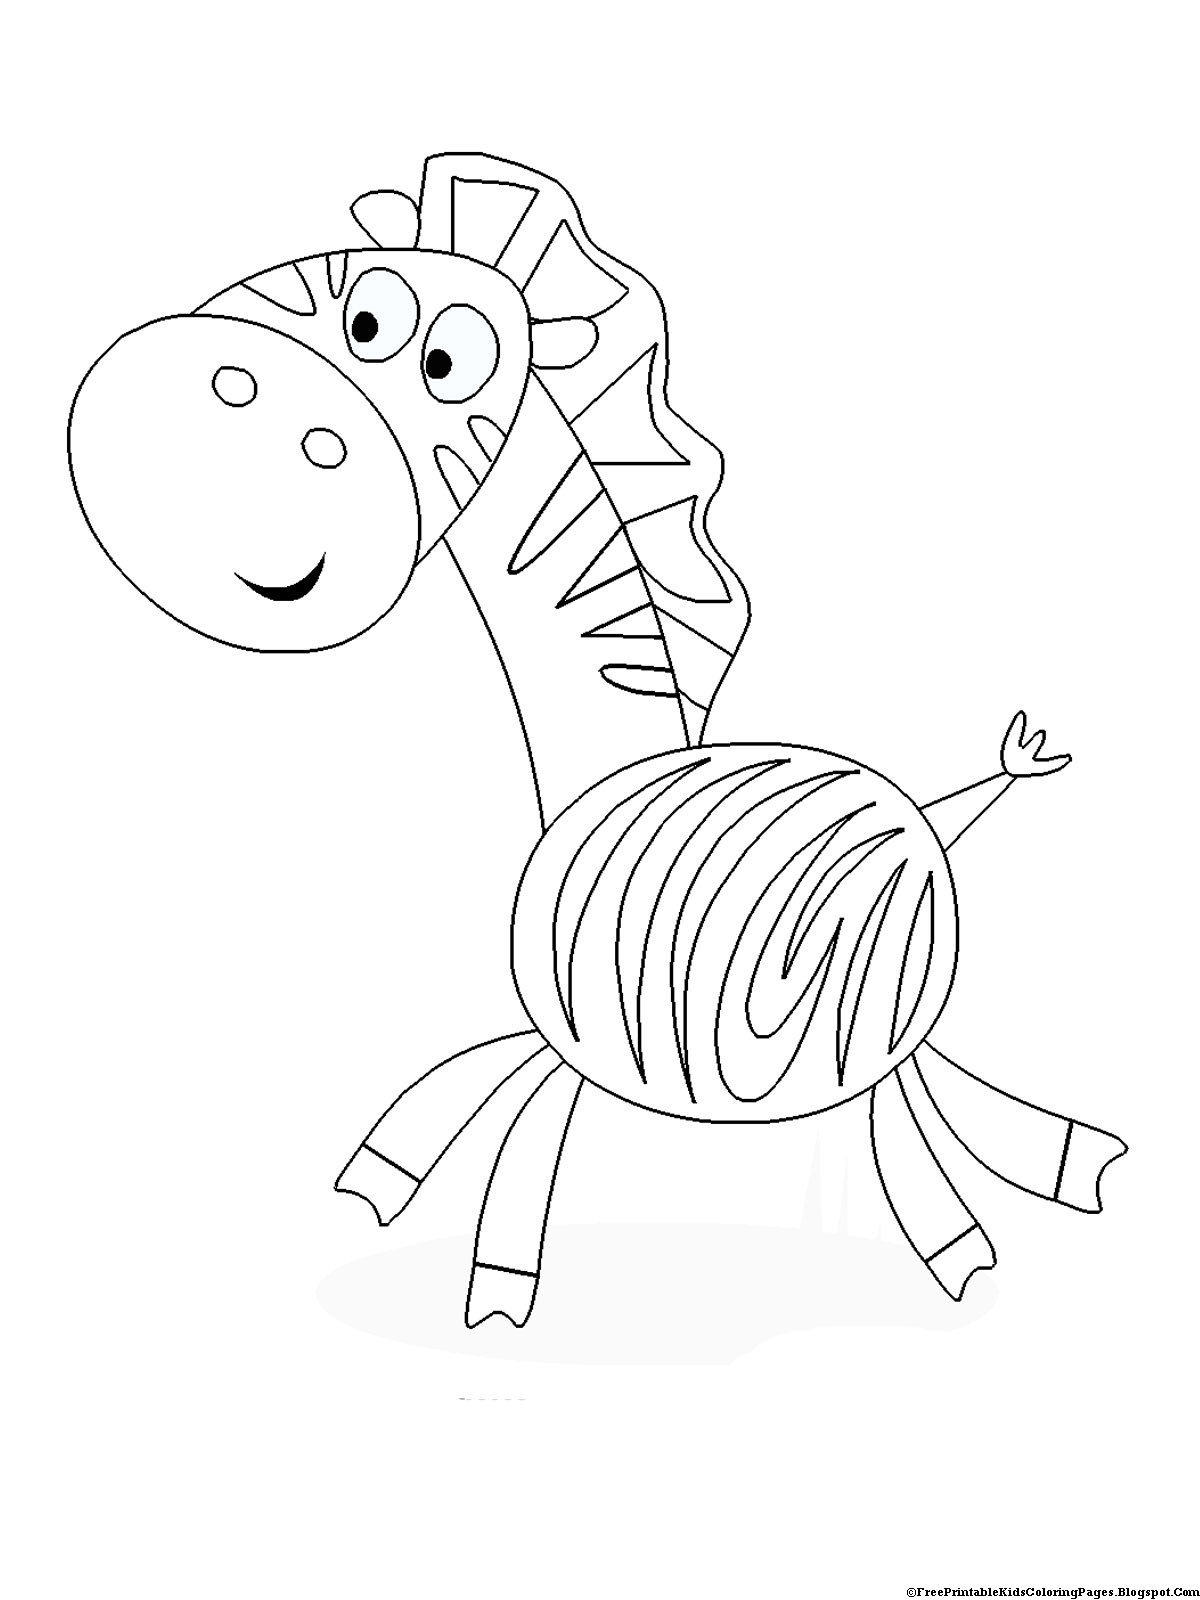 Printing Coloring Books
 Zebra Coloring Pages Free Printable Kids Coloring Pages